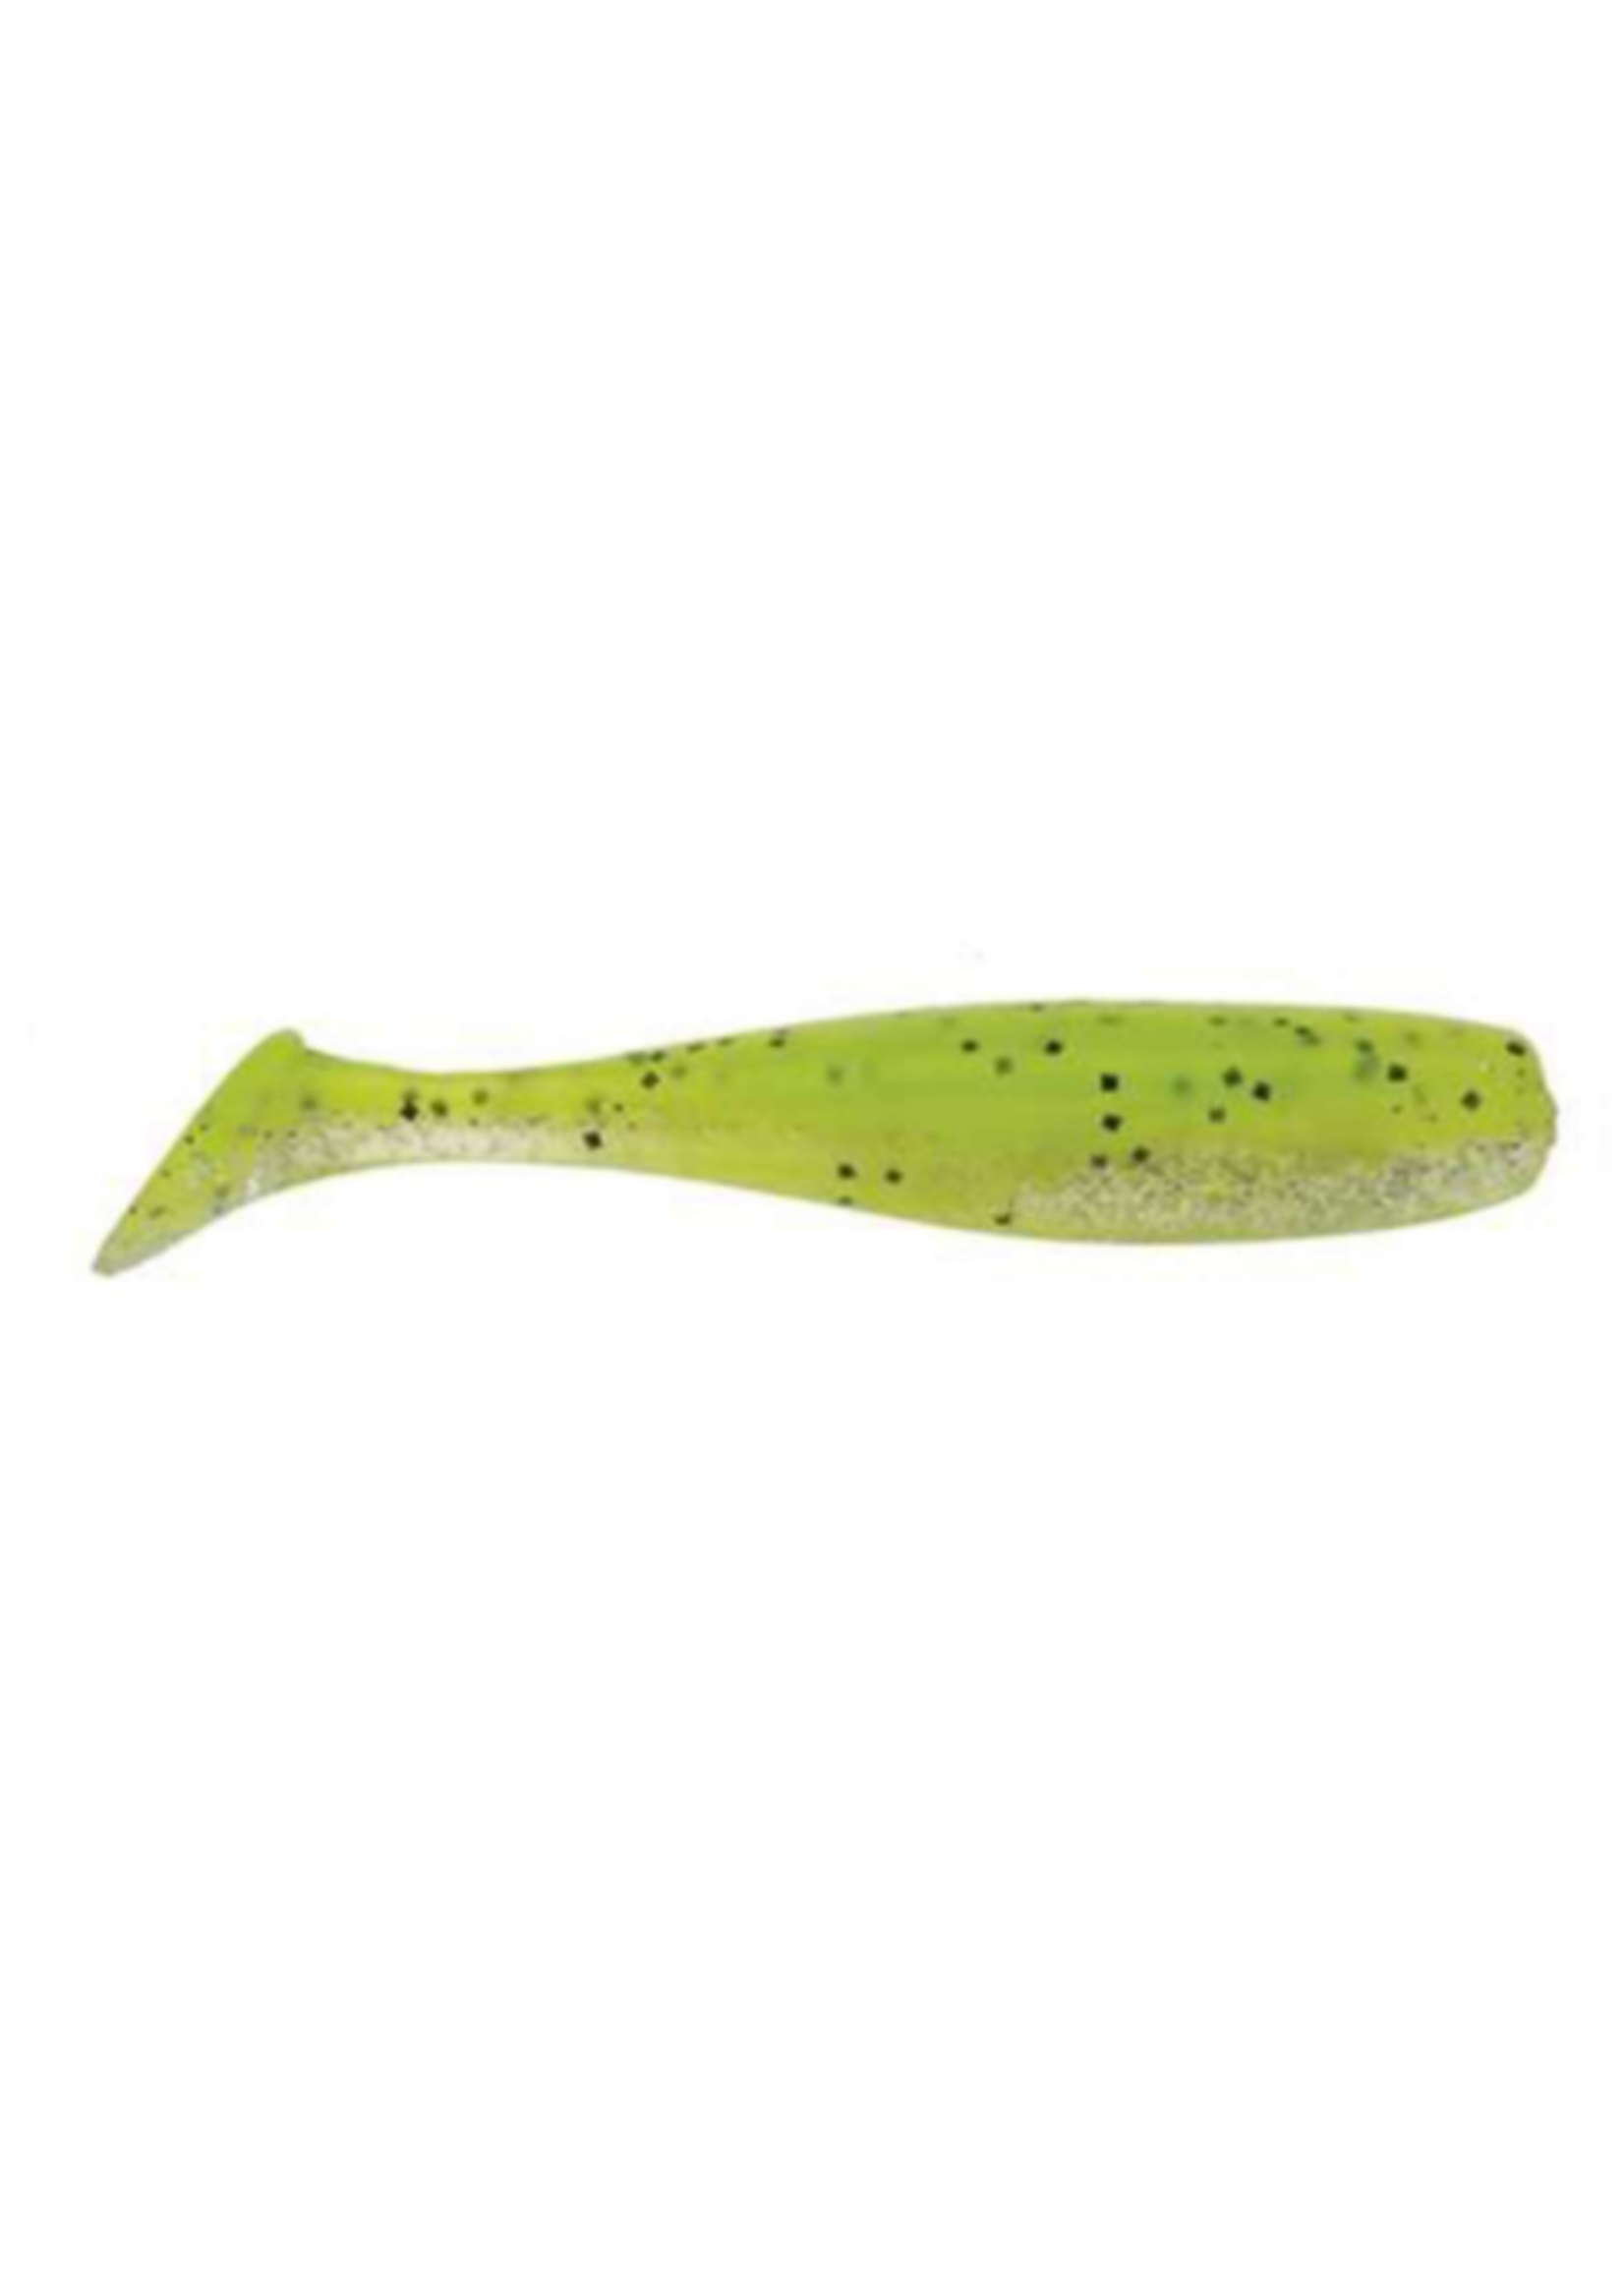 CAL Series Shad Tail - Greene 400 - Brothers Outdoors LLC